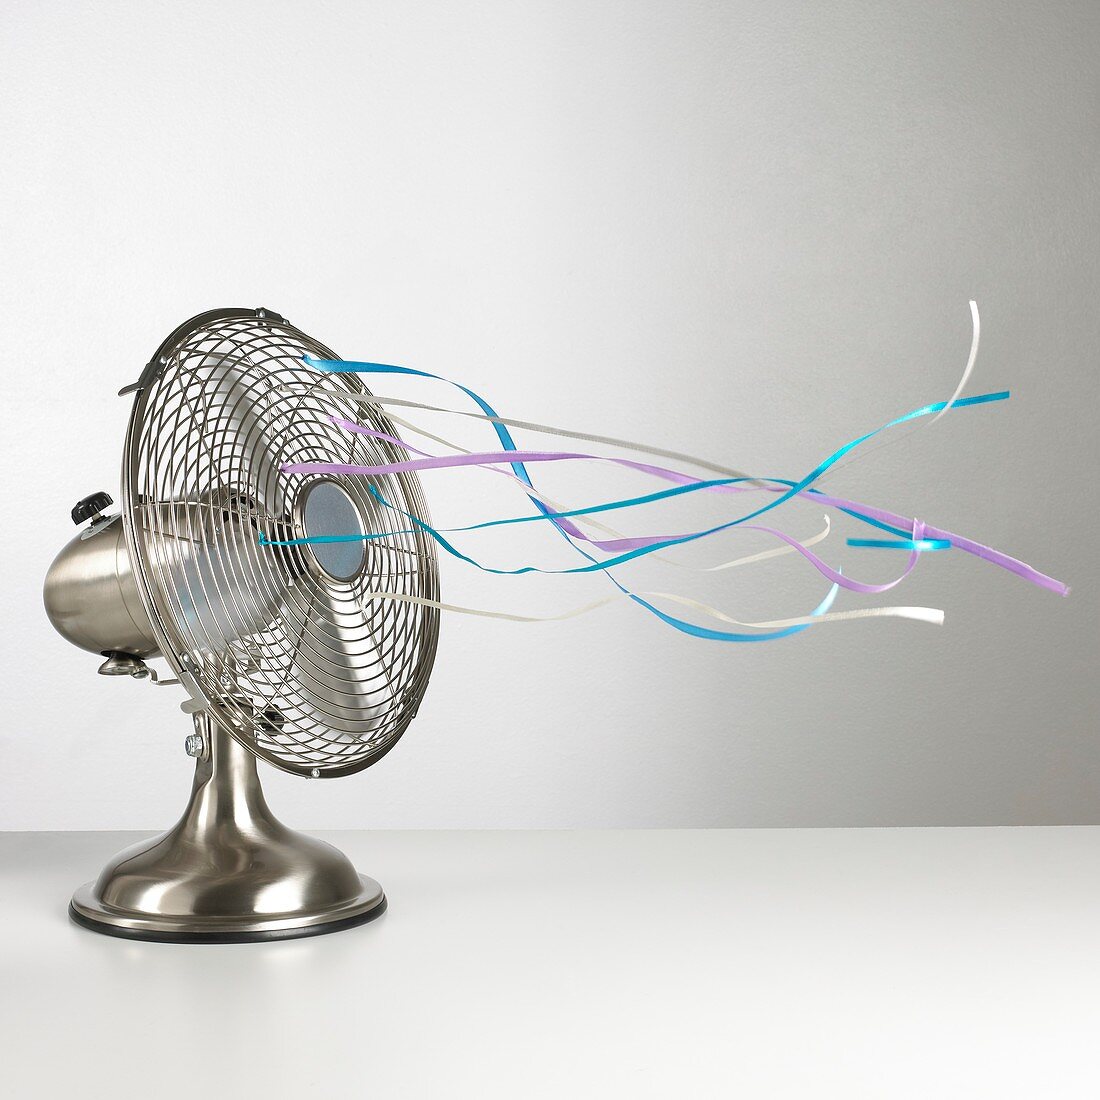 Domestic fan showing air movement